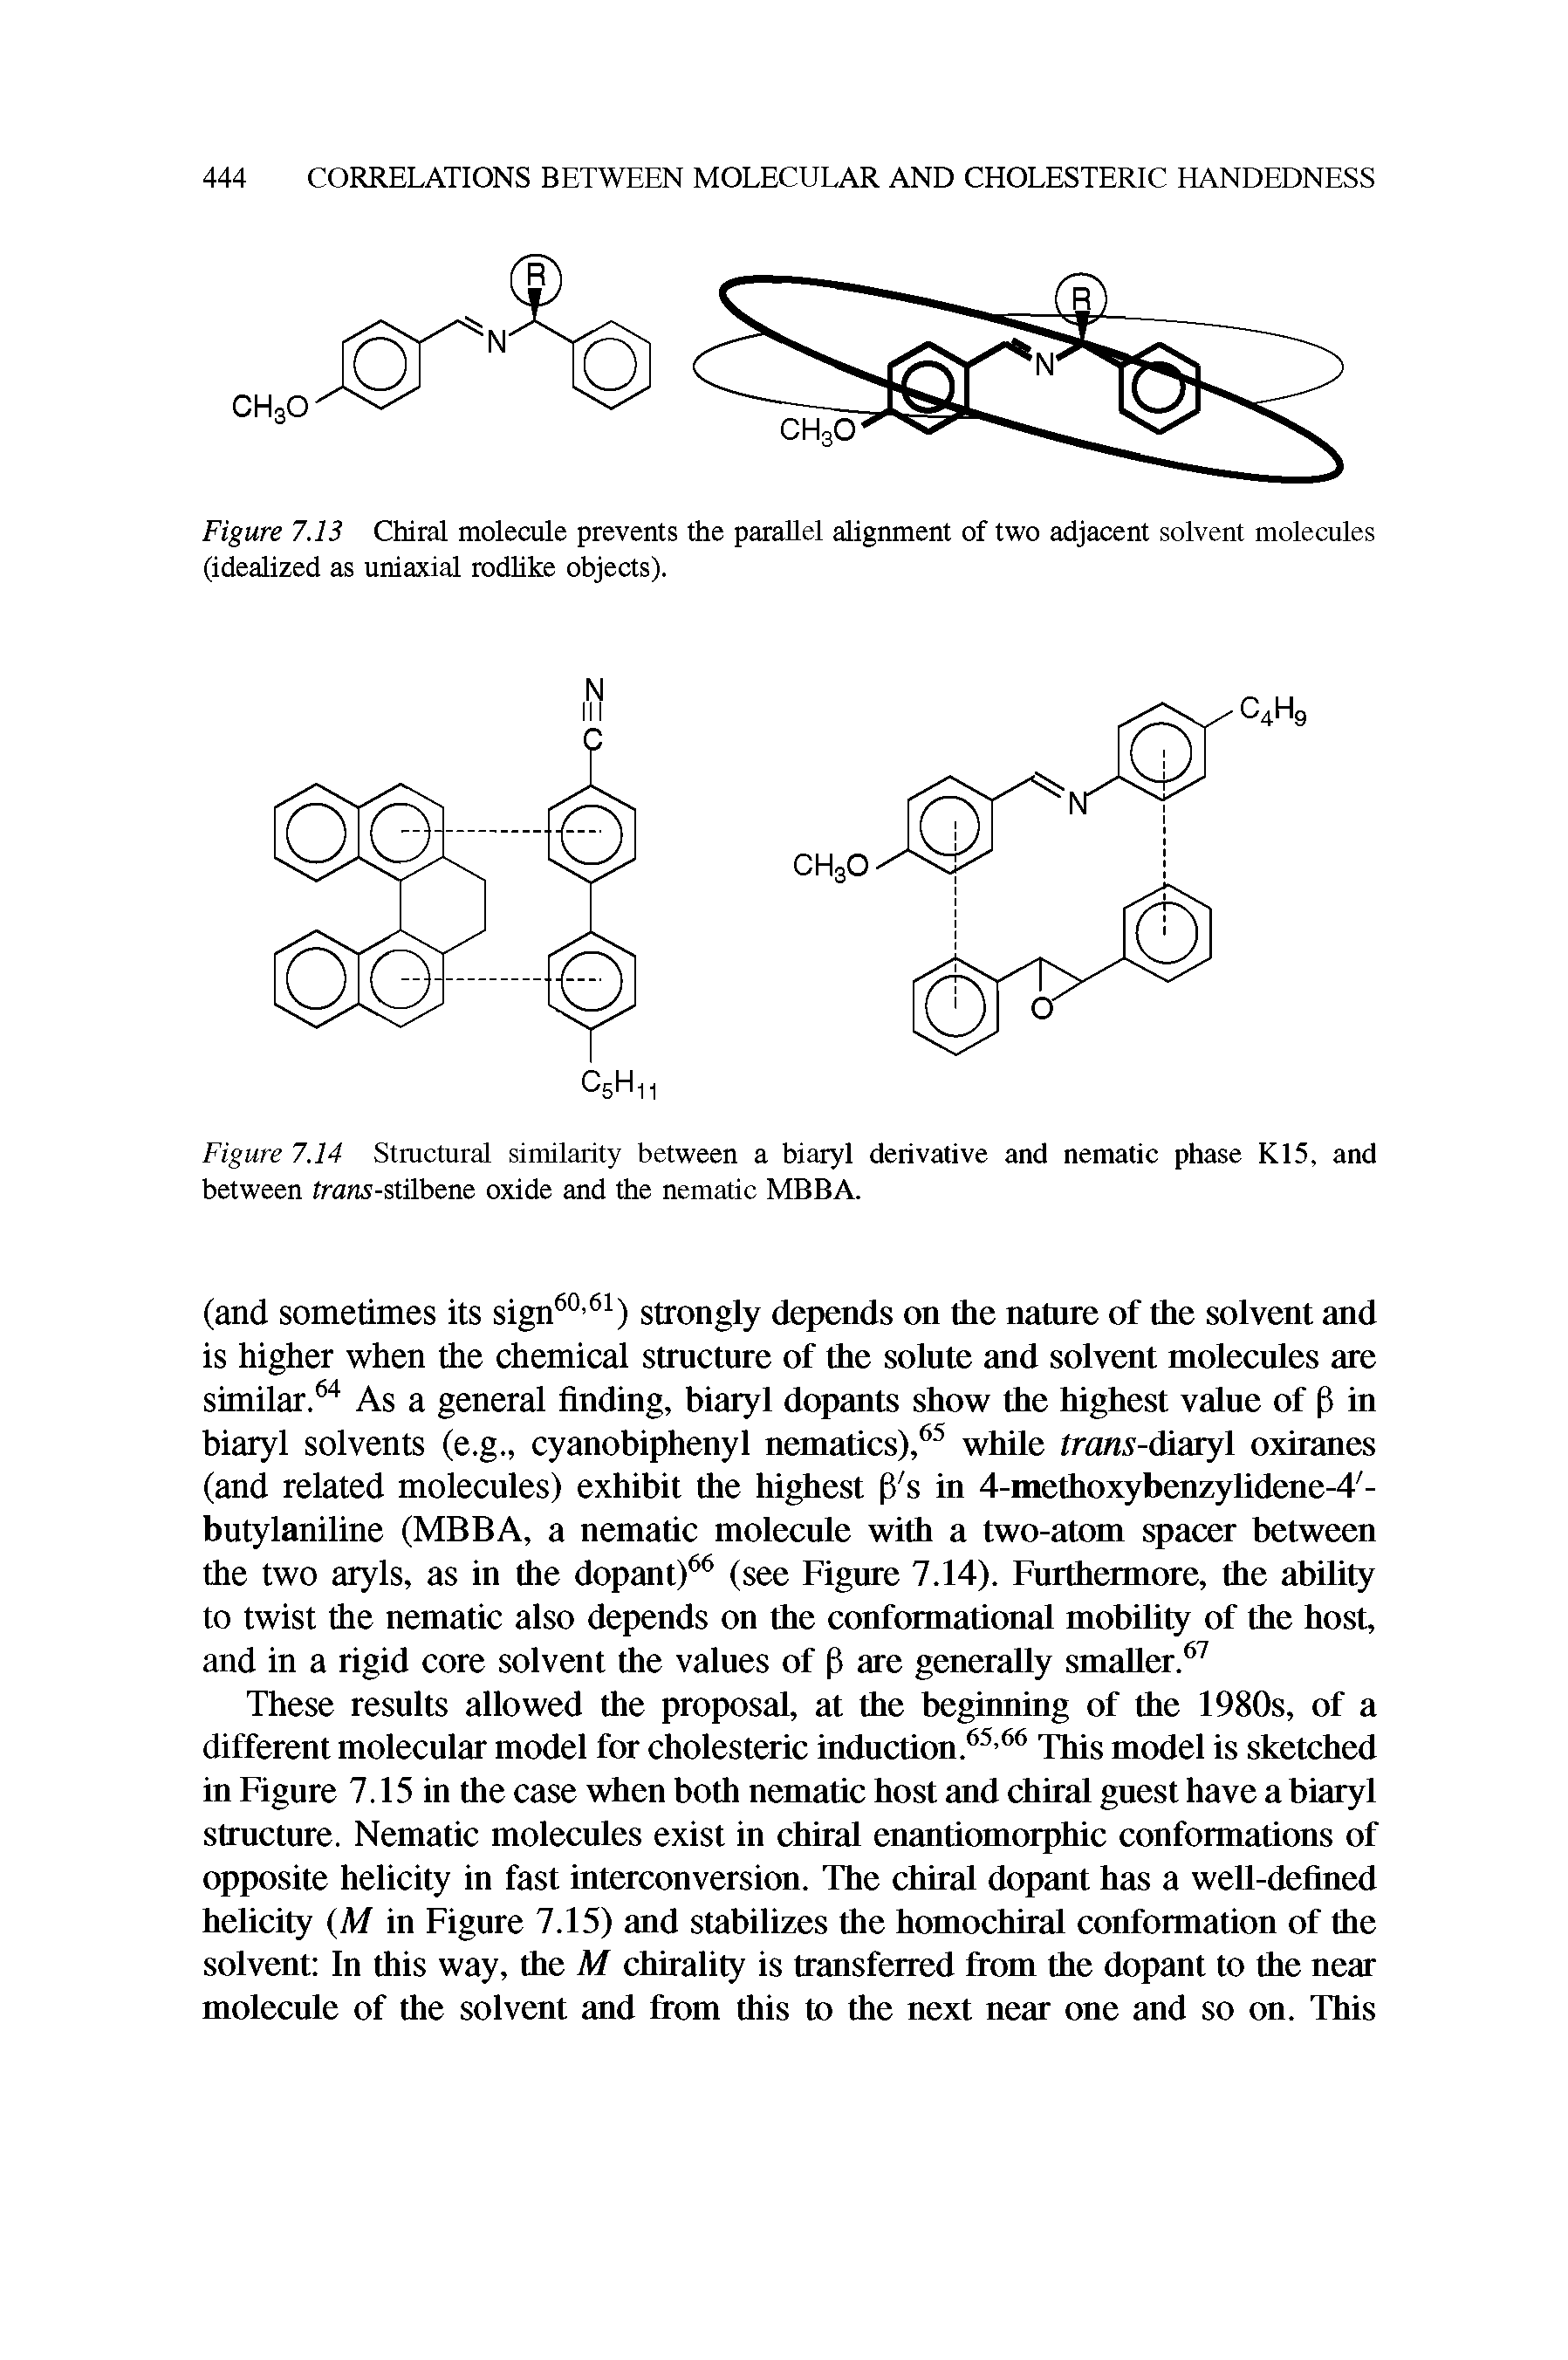 Figure 7.14 Structural similarity between a biaryl derivative and nematic phase K15, and between Irans-stilbene oxide and the nematic MBBA.